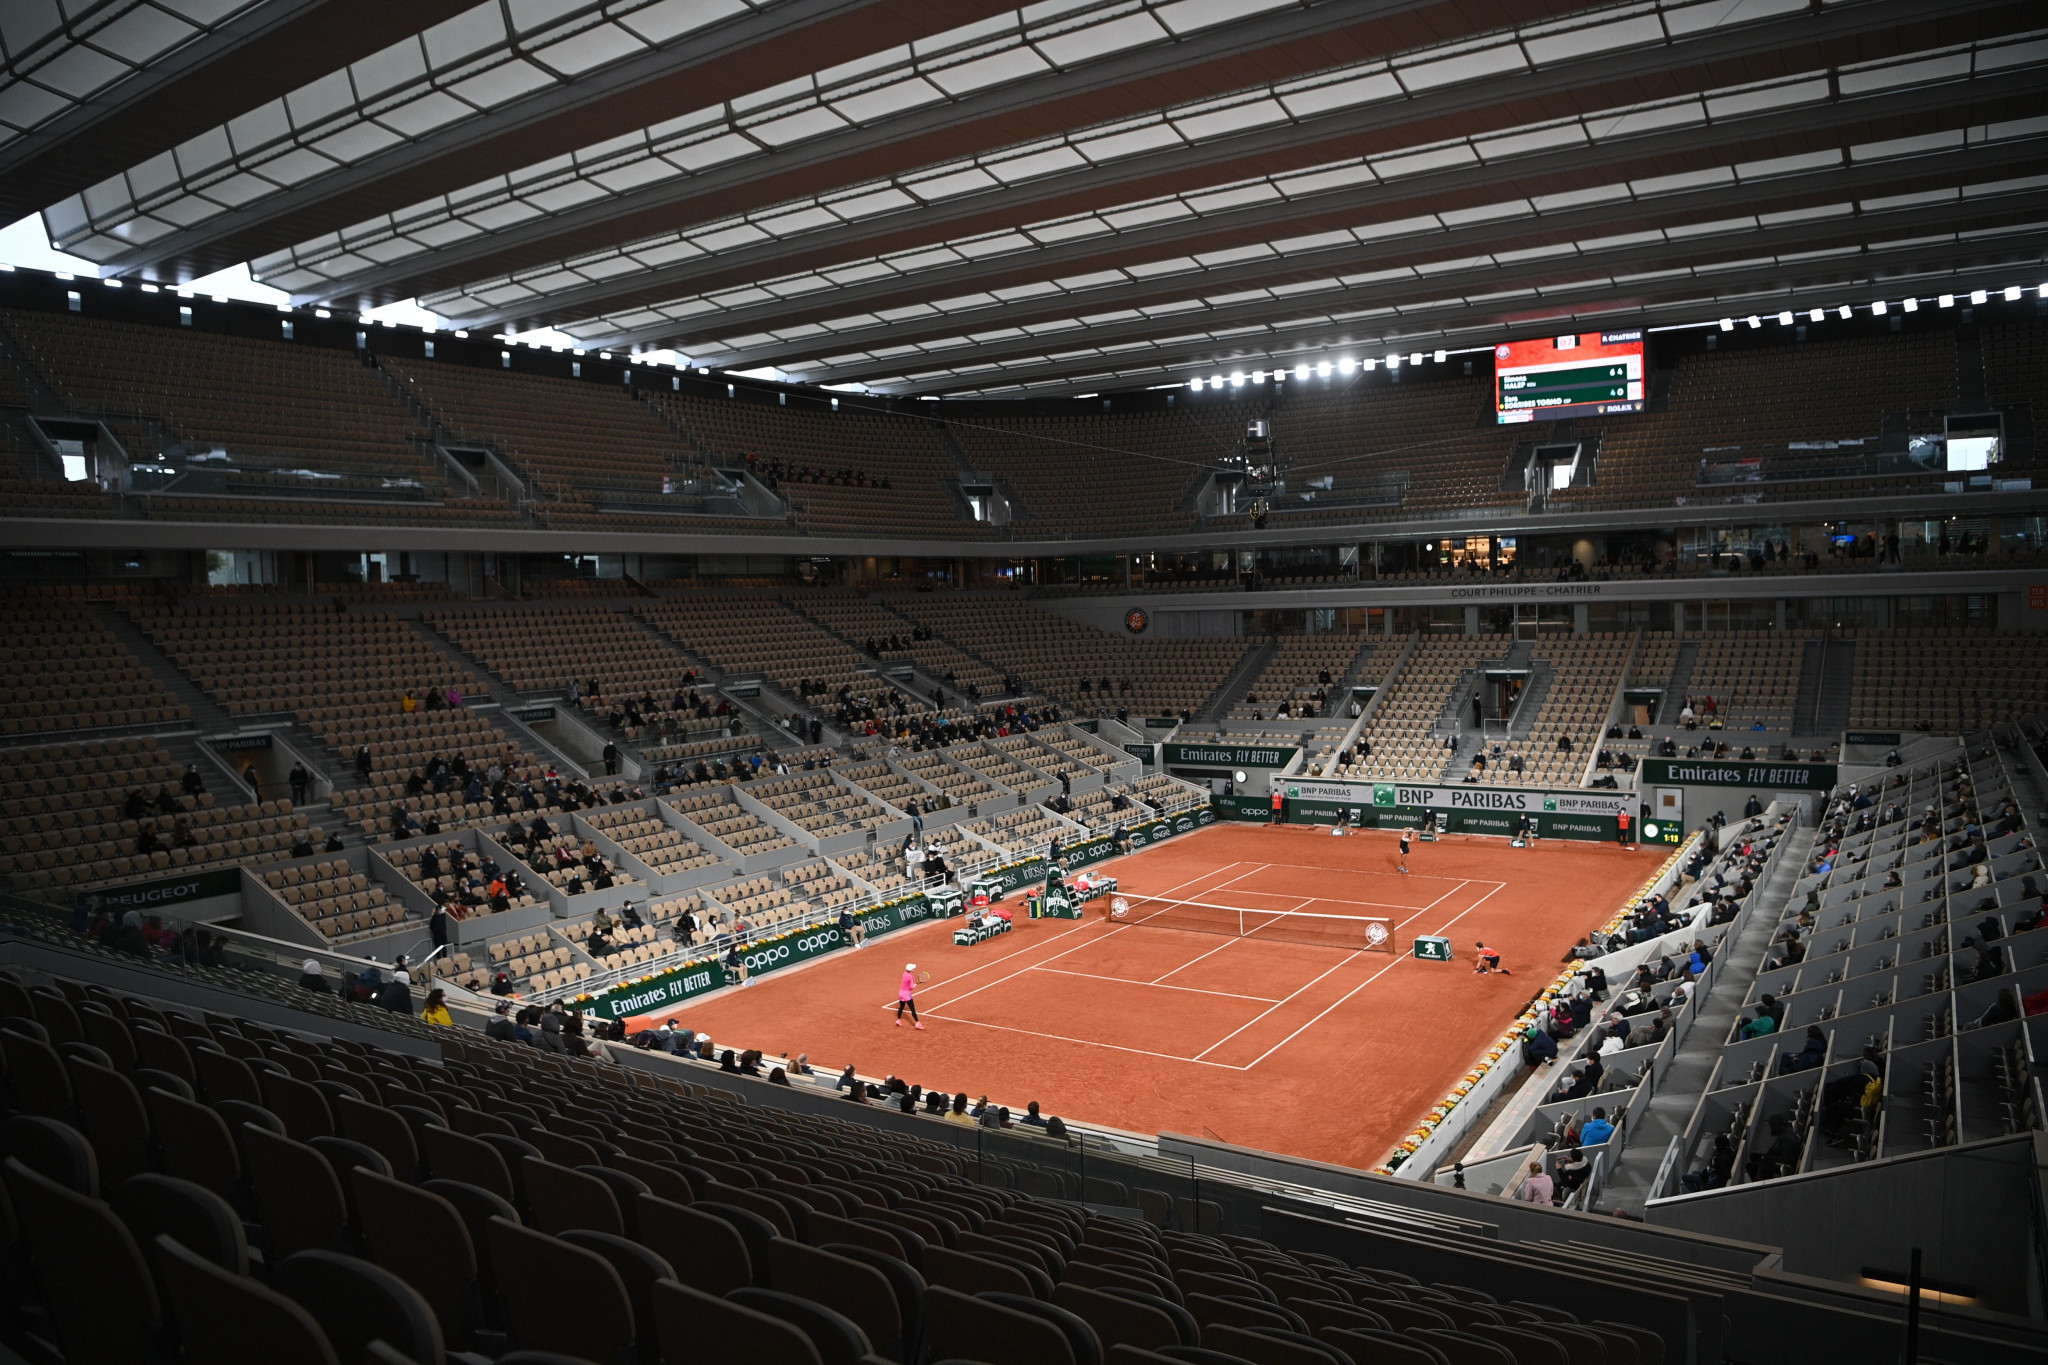 Only 1,000 spectators were admitted to Roland Garros due to the coronavirus pandemic ©Getty Images